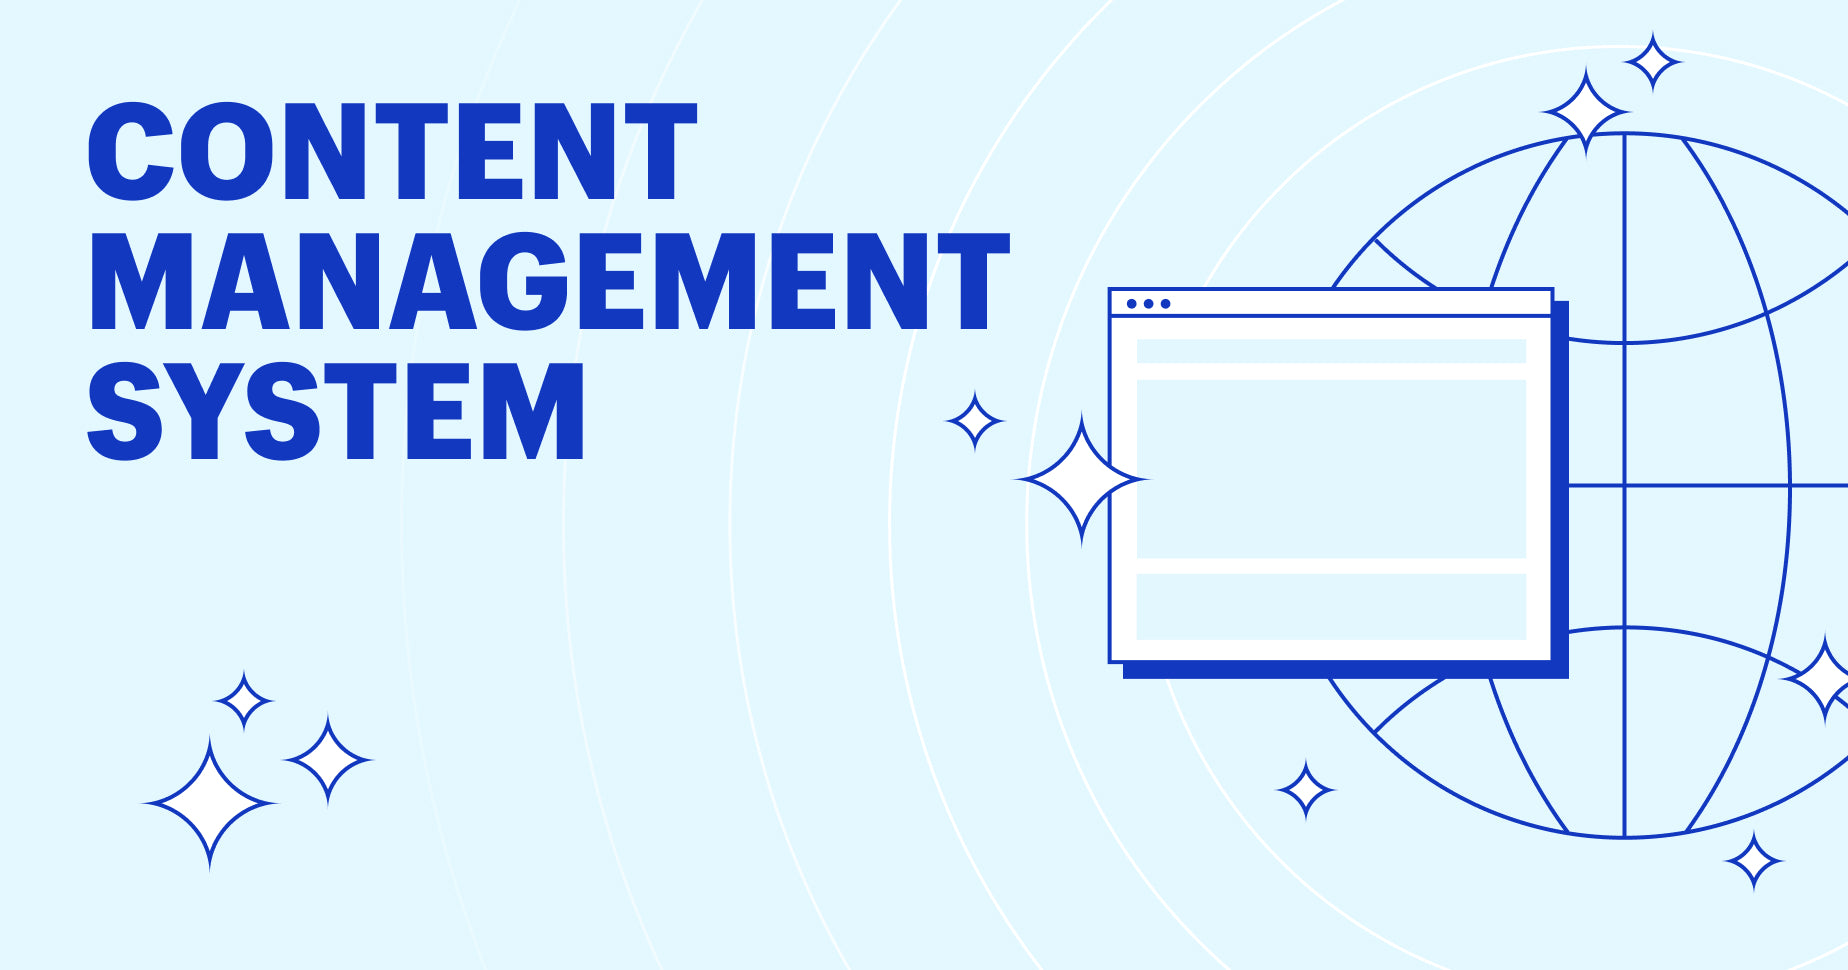 Header image for a blog post about content management systems